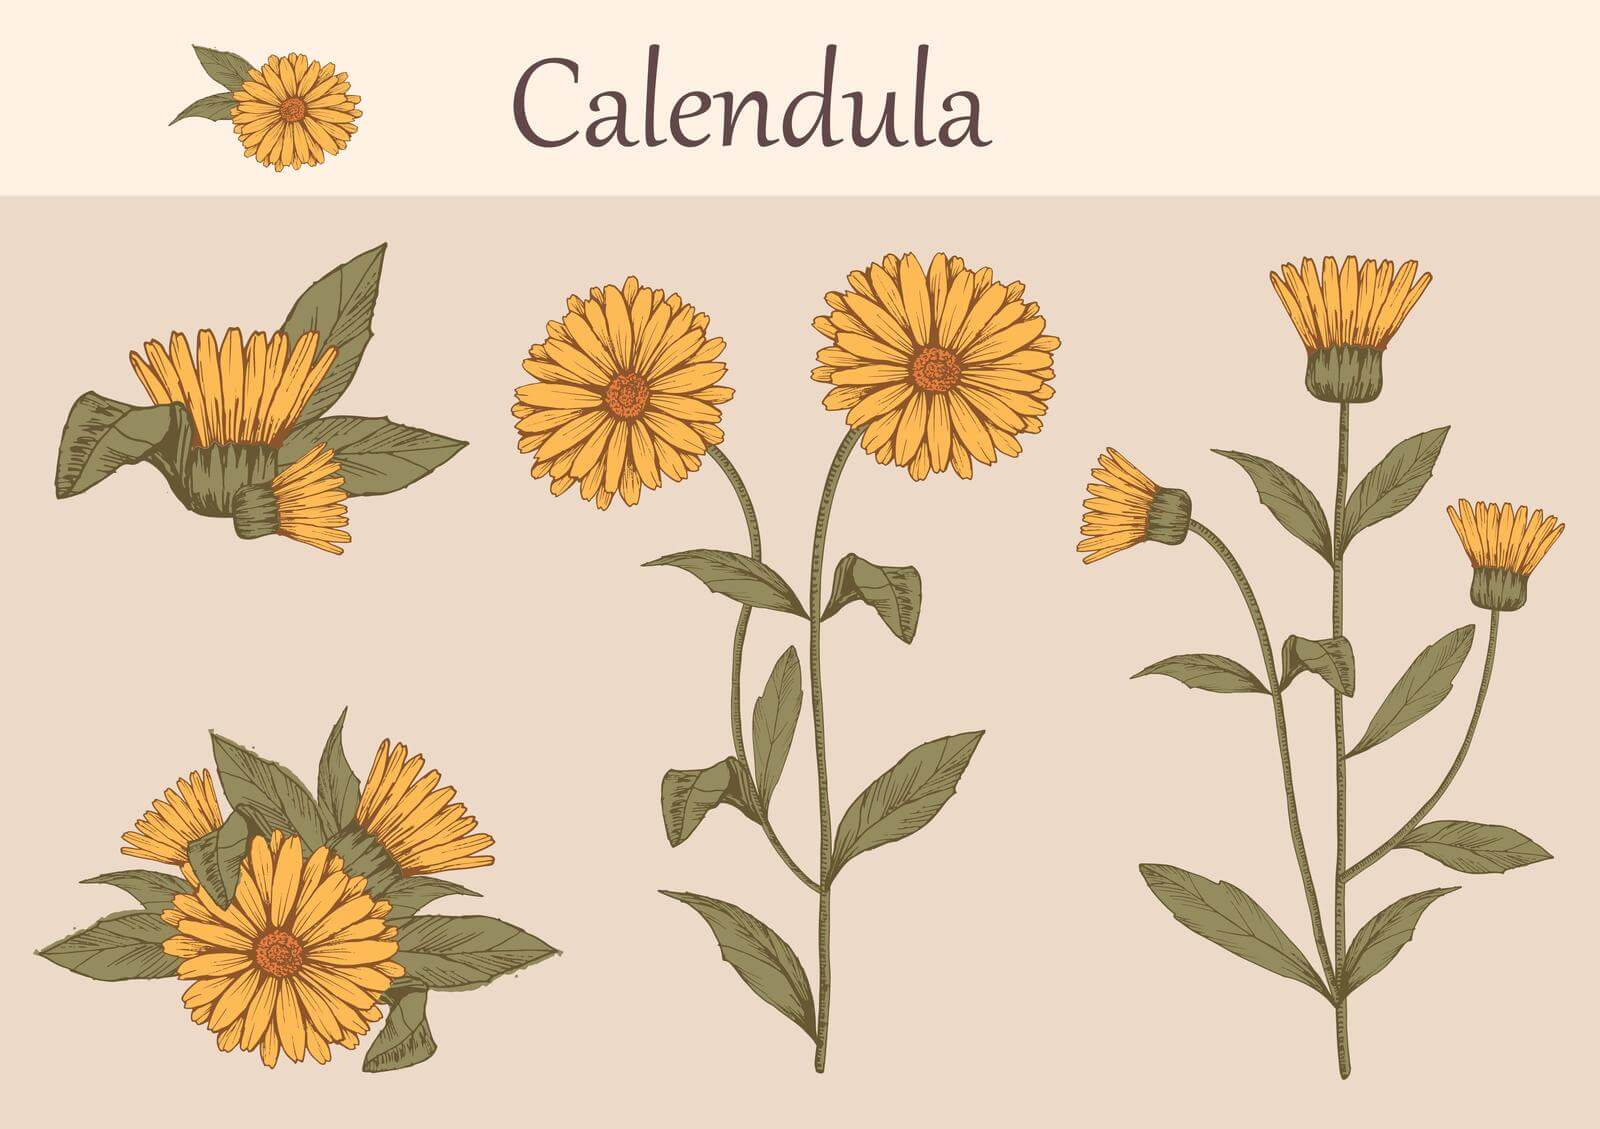 Hand-drawn image of calendula flowers with stems and leaves. Botanical illustration.